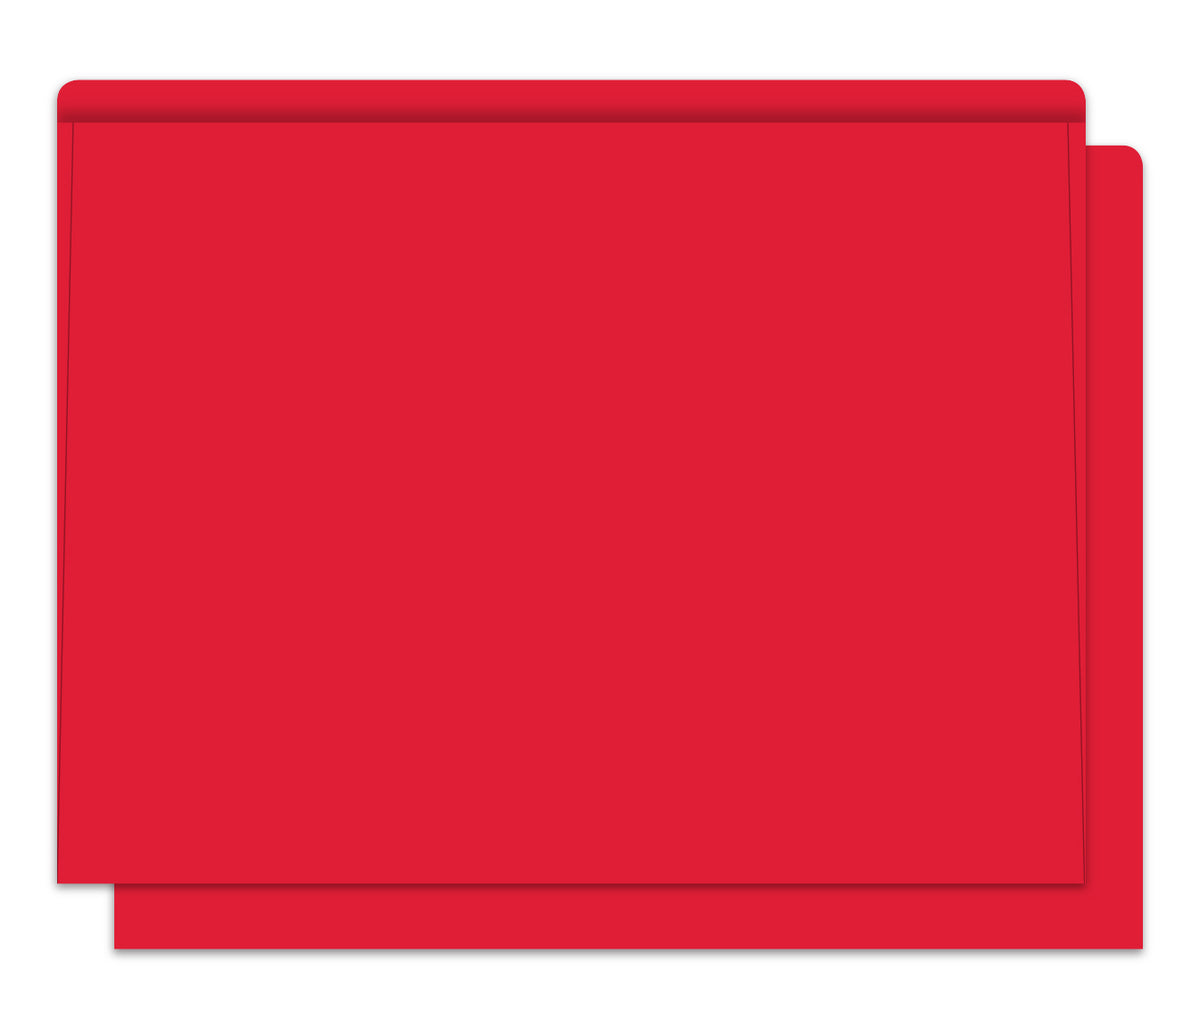 Heavy Duty Deal Envelopes (Jackets) Plain in Red [Packs of 100]; image is a plain, red-colored deal envelope. www.flywheelnw.com